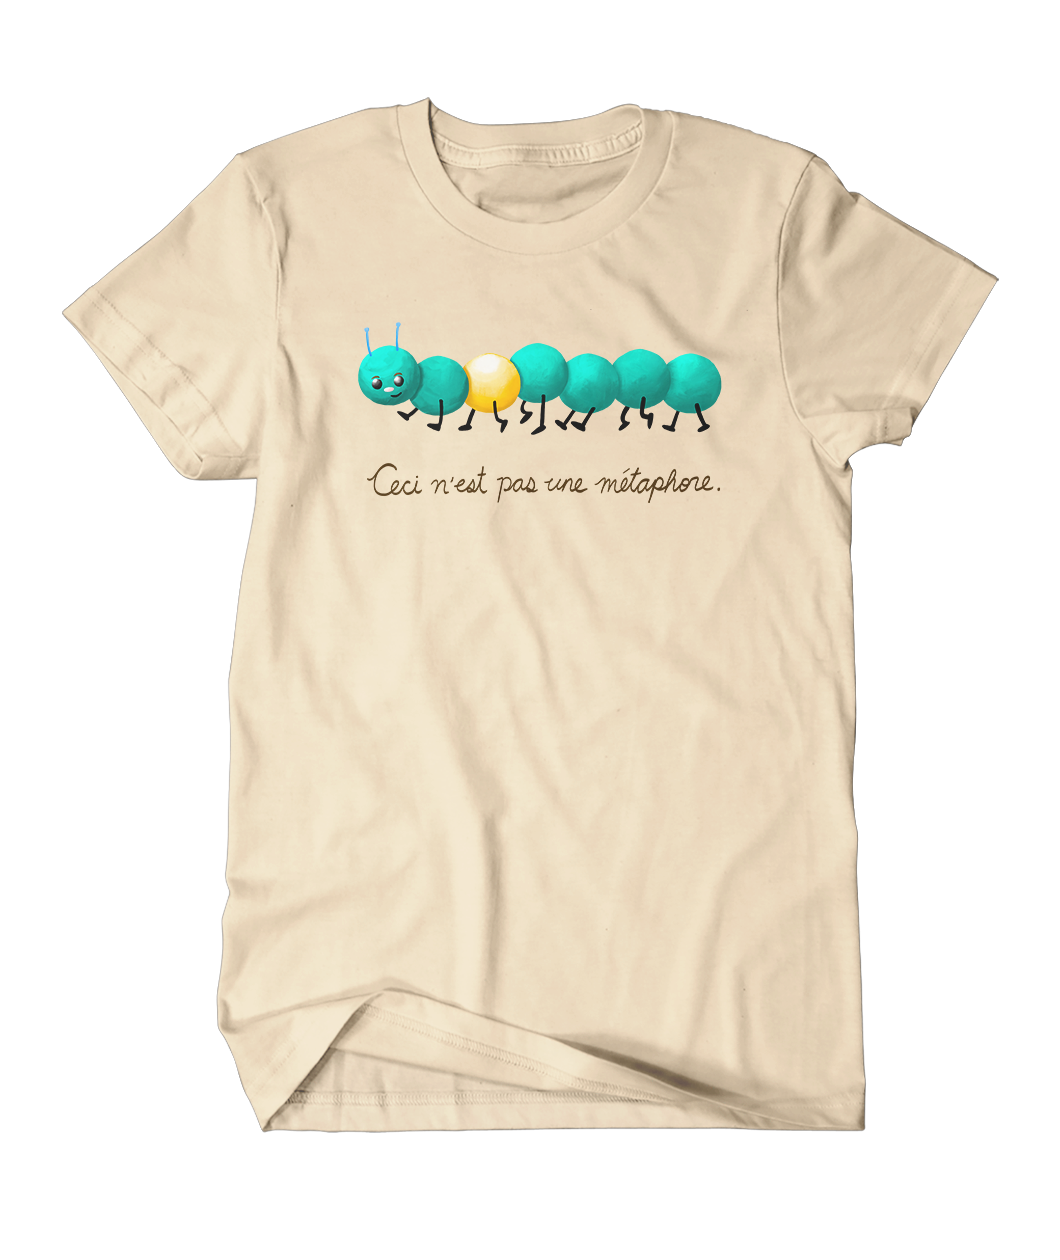 A beige t-shirt with a teal caterpillar - its body made up of teal balls with one yellow ball. Has a smile on its face, antennas and two little feet on each section. Cursive font below reads "Ceci n'est pas une metaphore". From Brian David Gilbert.